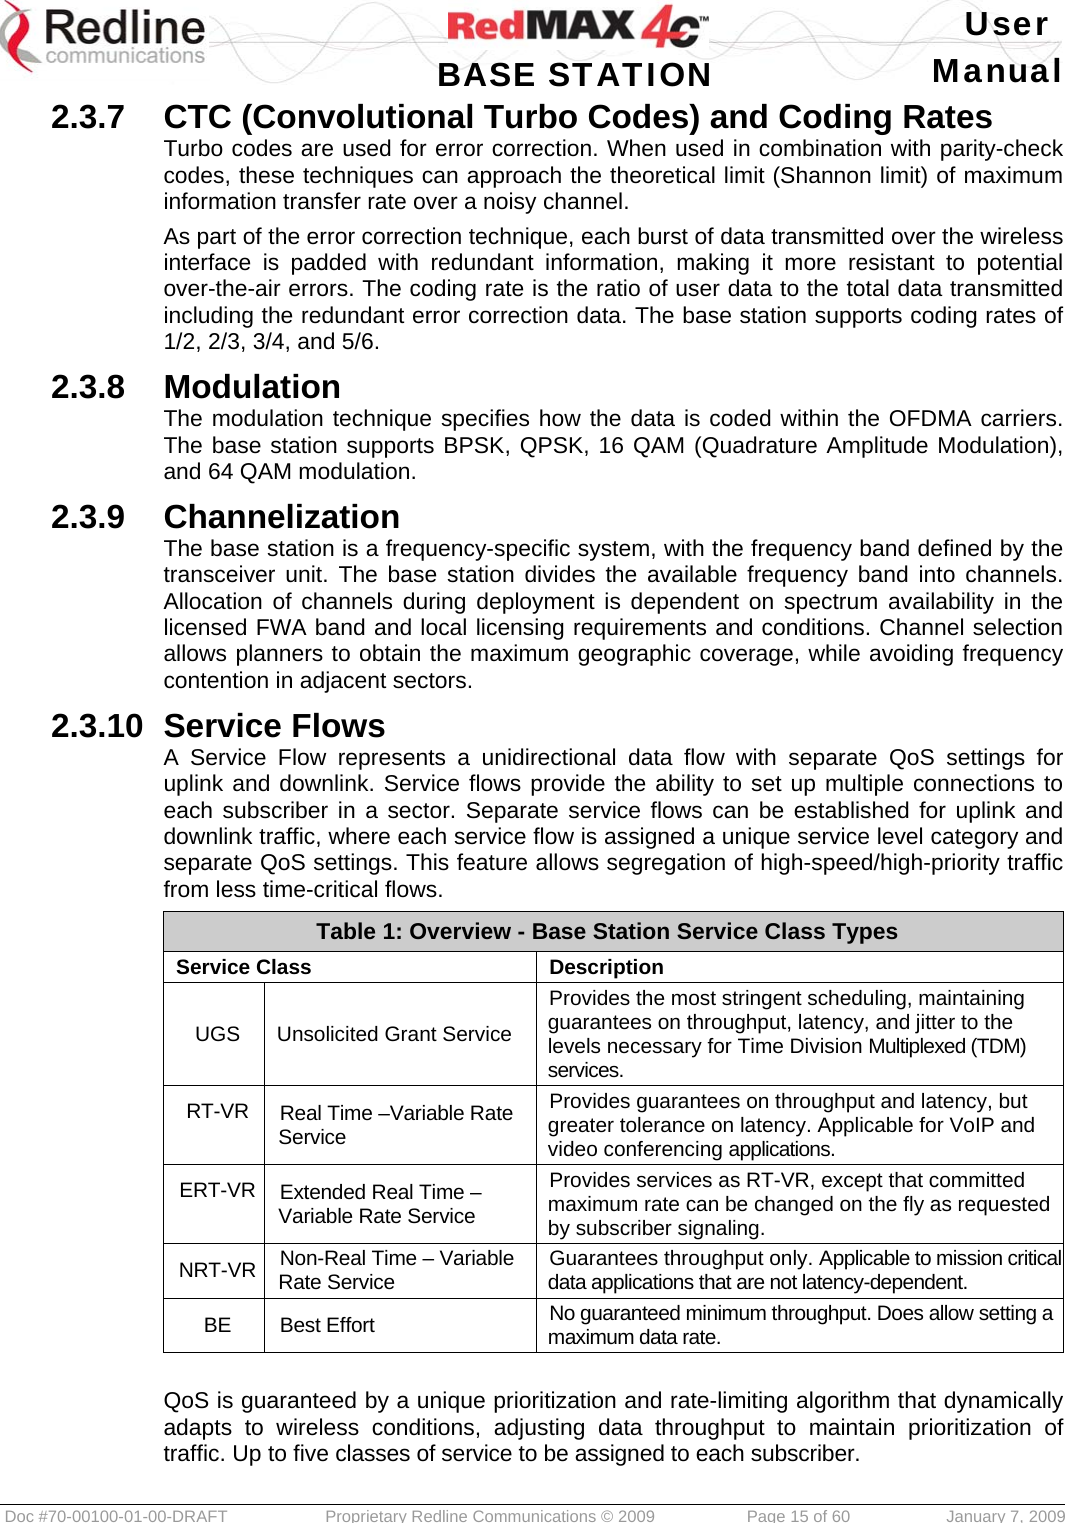   User  BASE STATION Manual  Doc #70-00100-01-00-DRAFT  Proprietary Redline Communications © 2009   Page 15 of 60  January 7, 2009 2.3.7  CTC (Convolutional Turbo Codes) and Coding Rates Turbo codes are used for error correction. When used in combination with parity-check codes, these techniques can approach the theoretical limit (Shannon limit) of maximum information transfer rate over a noisy channel. As part of the error correction technique, each burst of data transmitted over the wireless interface is padded with redundant information, making it more resistant to potential over-the-air errors. The coding rate is the ratio of user data to the total data transmitted including the redundant error correction data. The base station supports coding rates of 1/2, 2/3, 3/4, and 5/6. 2.3.8  Modulation The modulation technique specifies how the data is coded within the OFDMA carriers. The base station supports BPSK, QPSK, 16 QAM (Quadrature Amplitude Modulation), and 64 QAM modulation. 2.3.9  Channelization The base station is a frequency-specific system, with the frequency band defined by the transceiver unit. The base station divides the available frequency band into channels. Allocation of channels during deployment is dependent on spectrum availability in the licensed FWA band and local licensing requirements and conditions. Channel selection allows planners to obtain the maximum geographic coverage, while avoiding frequency contention in adjacent sectors. 2.3.10  Service Flows A Service Flow represents a unidirectional data flow with separate QoS settings for uplink and downlink. Service flows provide the ability to set up multiple connections to each subscriber in a sector. Separate service flows can be established for uplink and downlink traffic, where each service flow is assigned a unique service level category and separate QoS settings. This feature allows segregation of high-speed/high-priority traffic from less time-critical flows. Table 1: Overview - Base Station Service Class Types Service Class  Description UGS  Unsolicited Grant Service Provides the most stringent scheduling, maintaining guarantees on throughput, latency, and jitter to the levels necessary for Time Division Multiplexed (TDM) services. RT-VR  Real Time –Variable Rate Service Provides guarantees on throughput and latency, but greater tolerance on latency. Applicable for VoIP and video conferencing applications. ERT-VR  Extended Real Time –Variable Rate Service Provides services as RT-VR, except that committed maximum rate can be changed on the fly as requested by subscriber signaling. NRT-VR  Non-Real Time – Variable Rate Service  Guarantees throughput only. Applicable to mission critical data applications that are not latency-dependent. BE Best Effort  No guaranteed minimum throughput. Does allow setting a maximum data rate.  QoS is guaranteed by a unique prioritization and rate-limiting algorithm that dynamically adapts to wireless conditions, adjusting data throughput to maintain prioritization of traffic. Up to five classes of service to be assigned to each subscriber. 